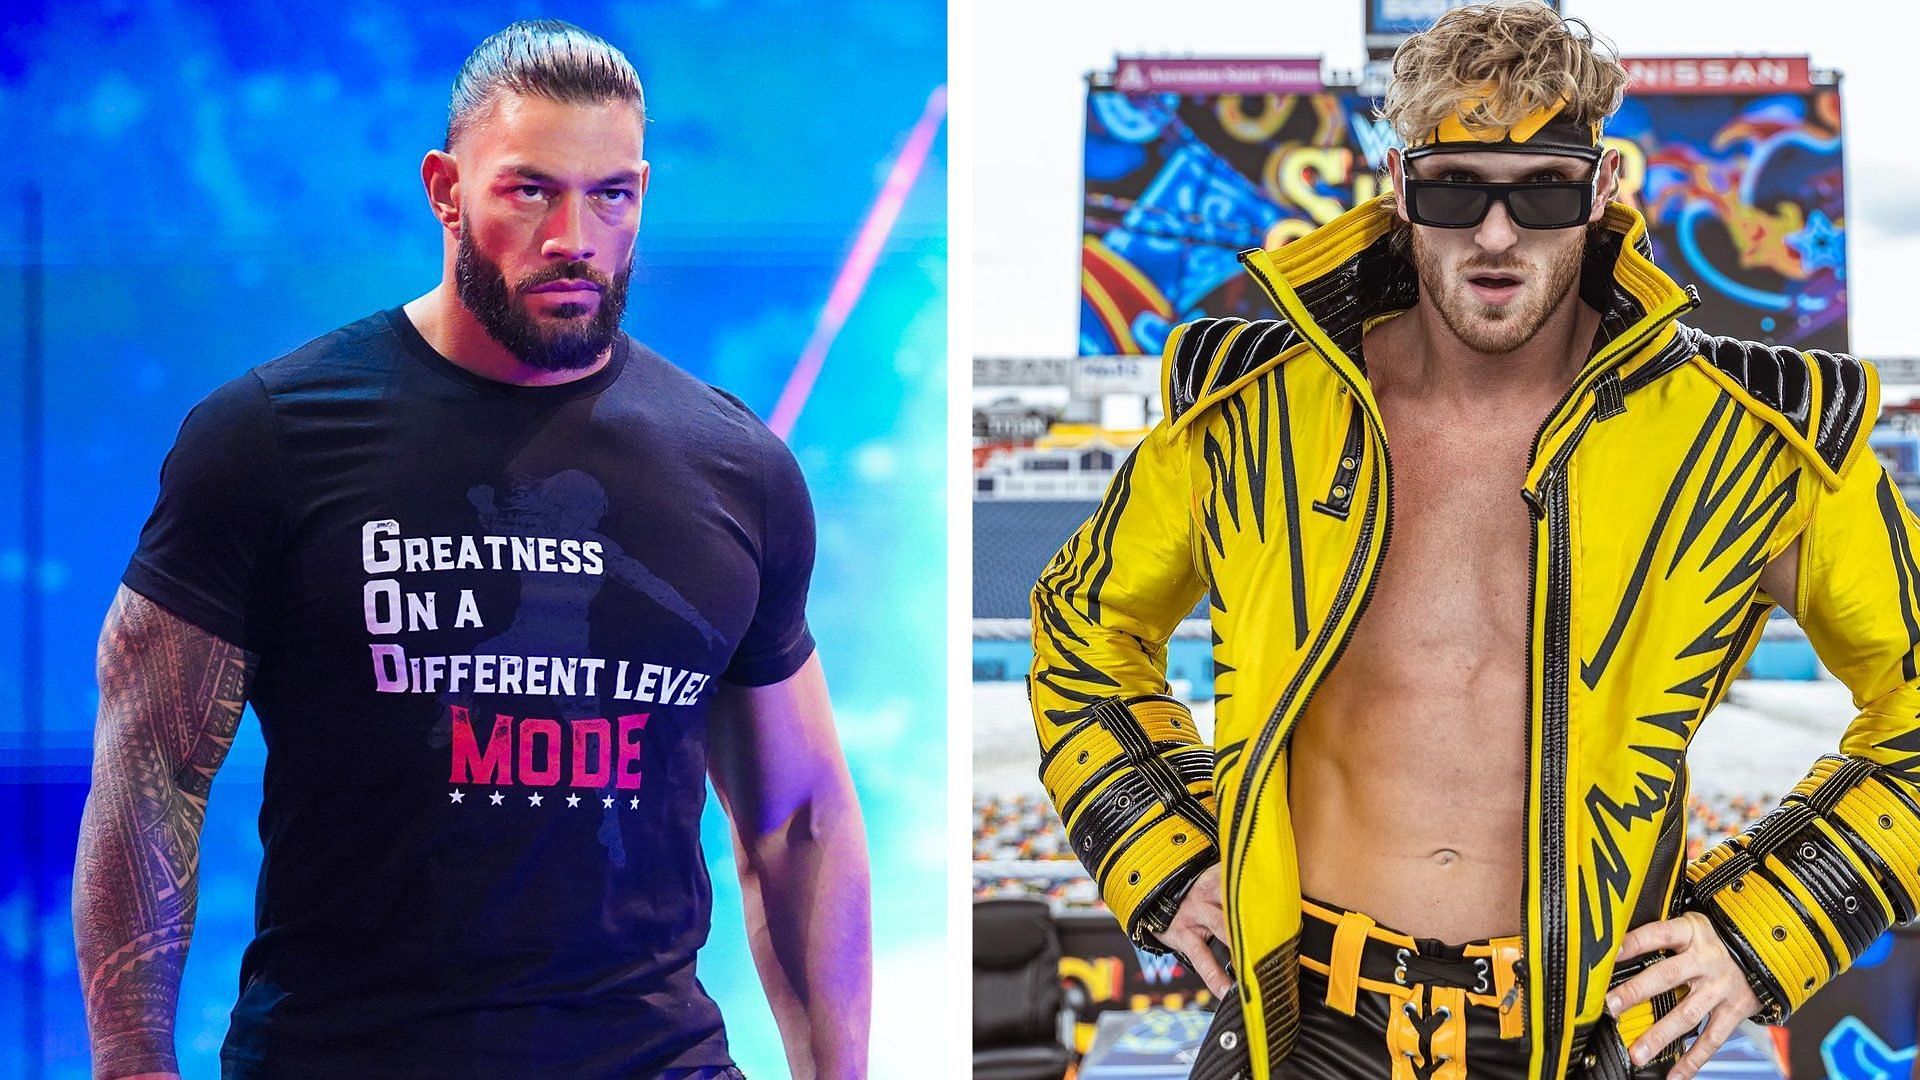 Roman Reigns and Logan Paul are set to go face-to-face on WWE SmackDown